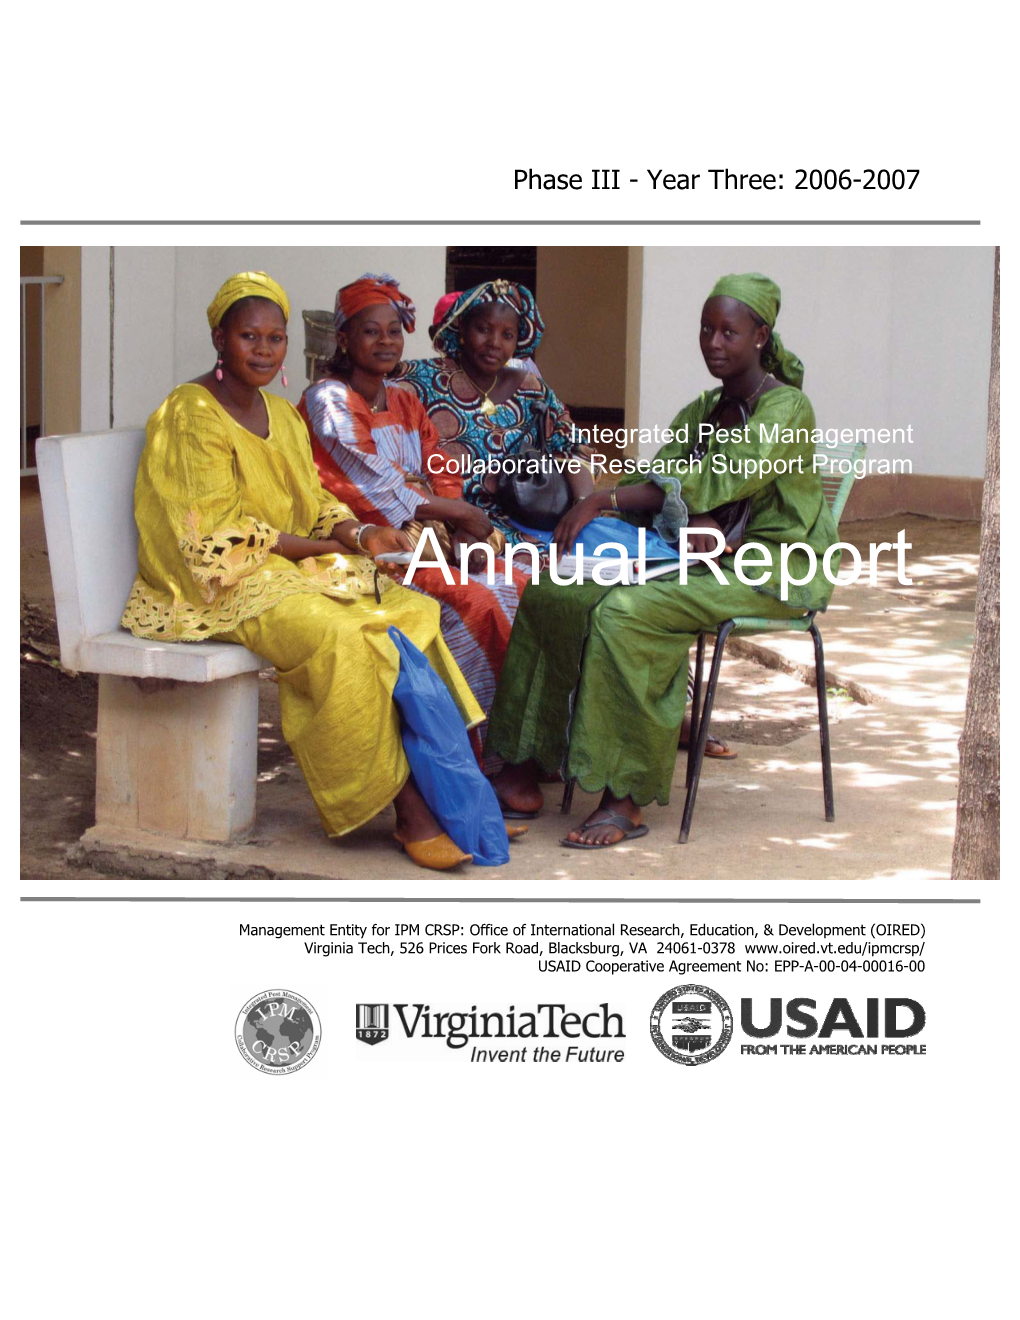 IPM CRSP Annual Report 2007